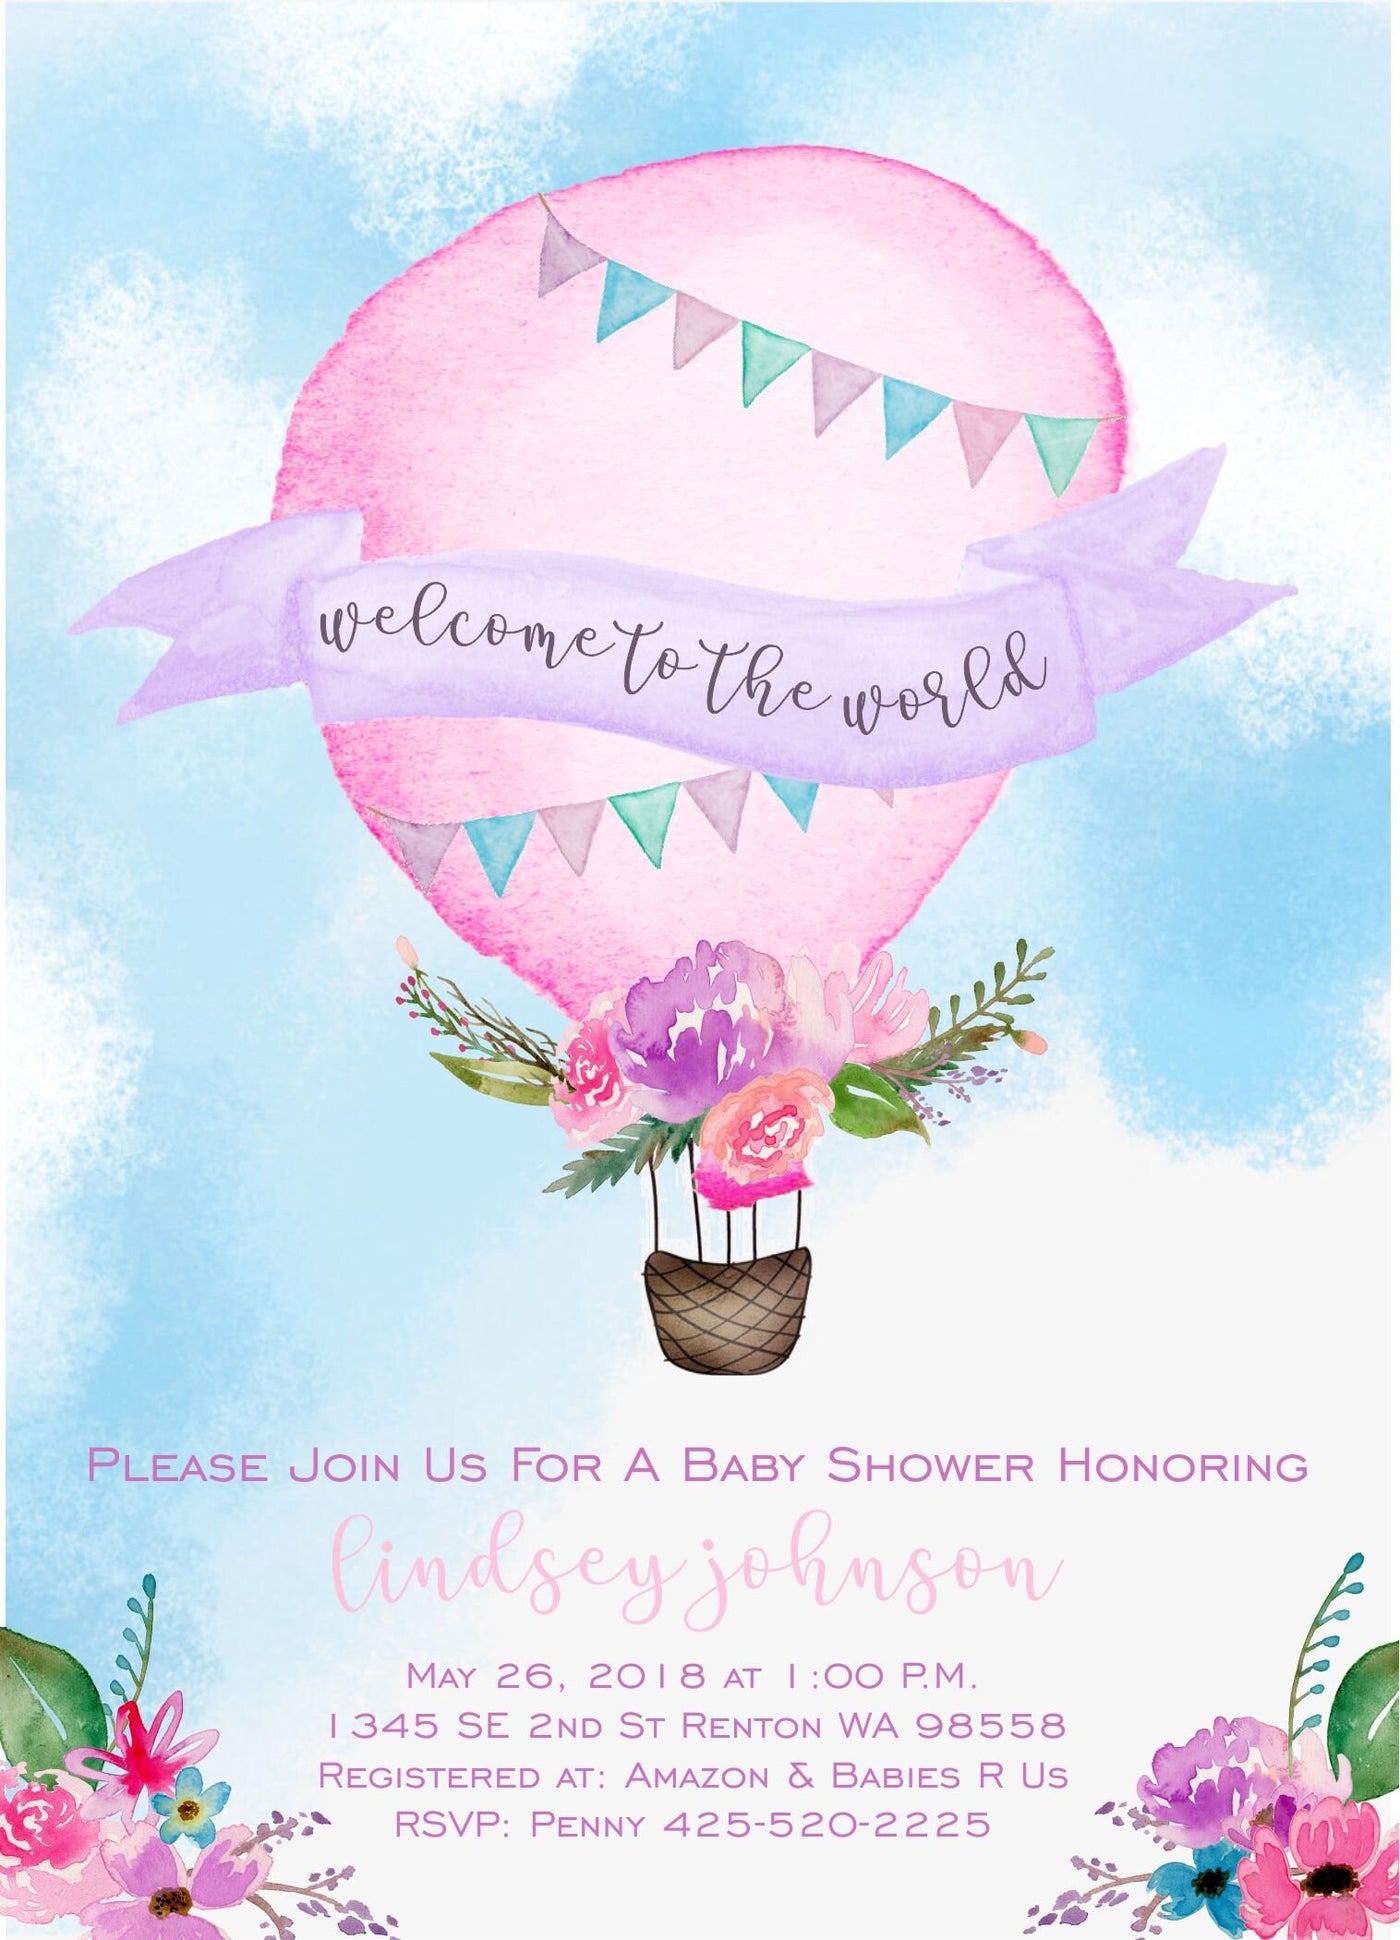 Hot Air Balloon Baby Shower Invitation, Hot Air Balloon Baby Shower, Hot Air Balloon Invitation, Pink Watercolor, Up Up and Away Baby Shower